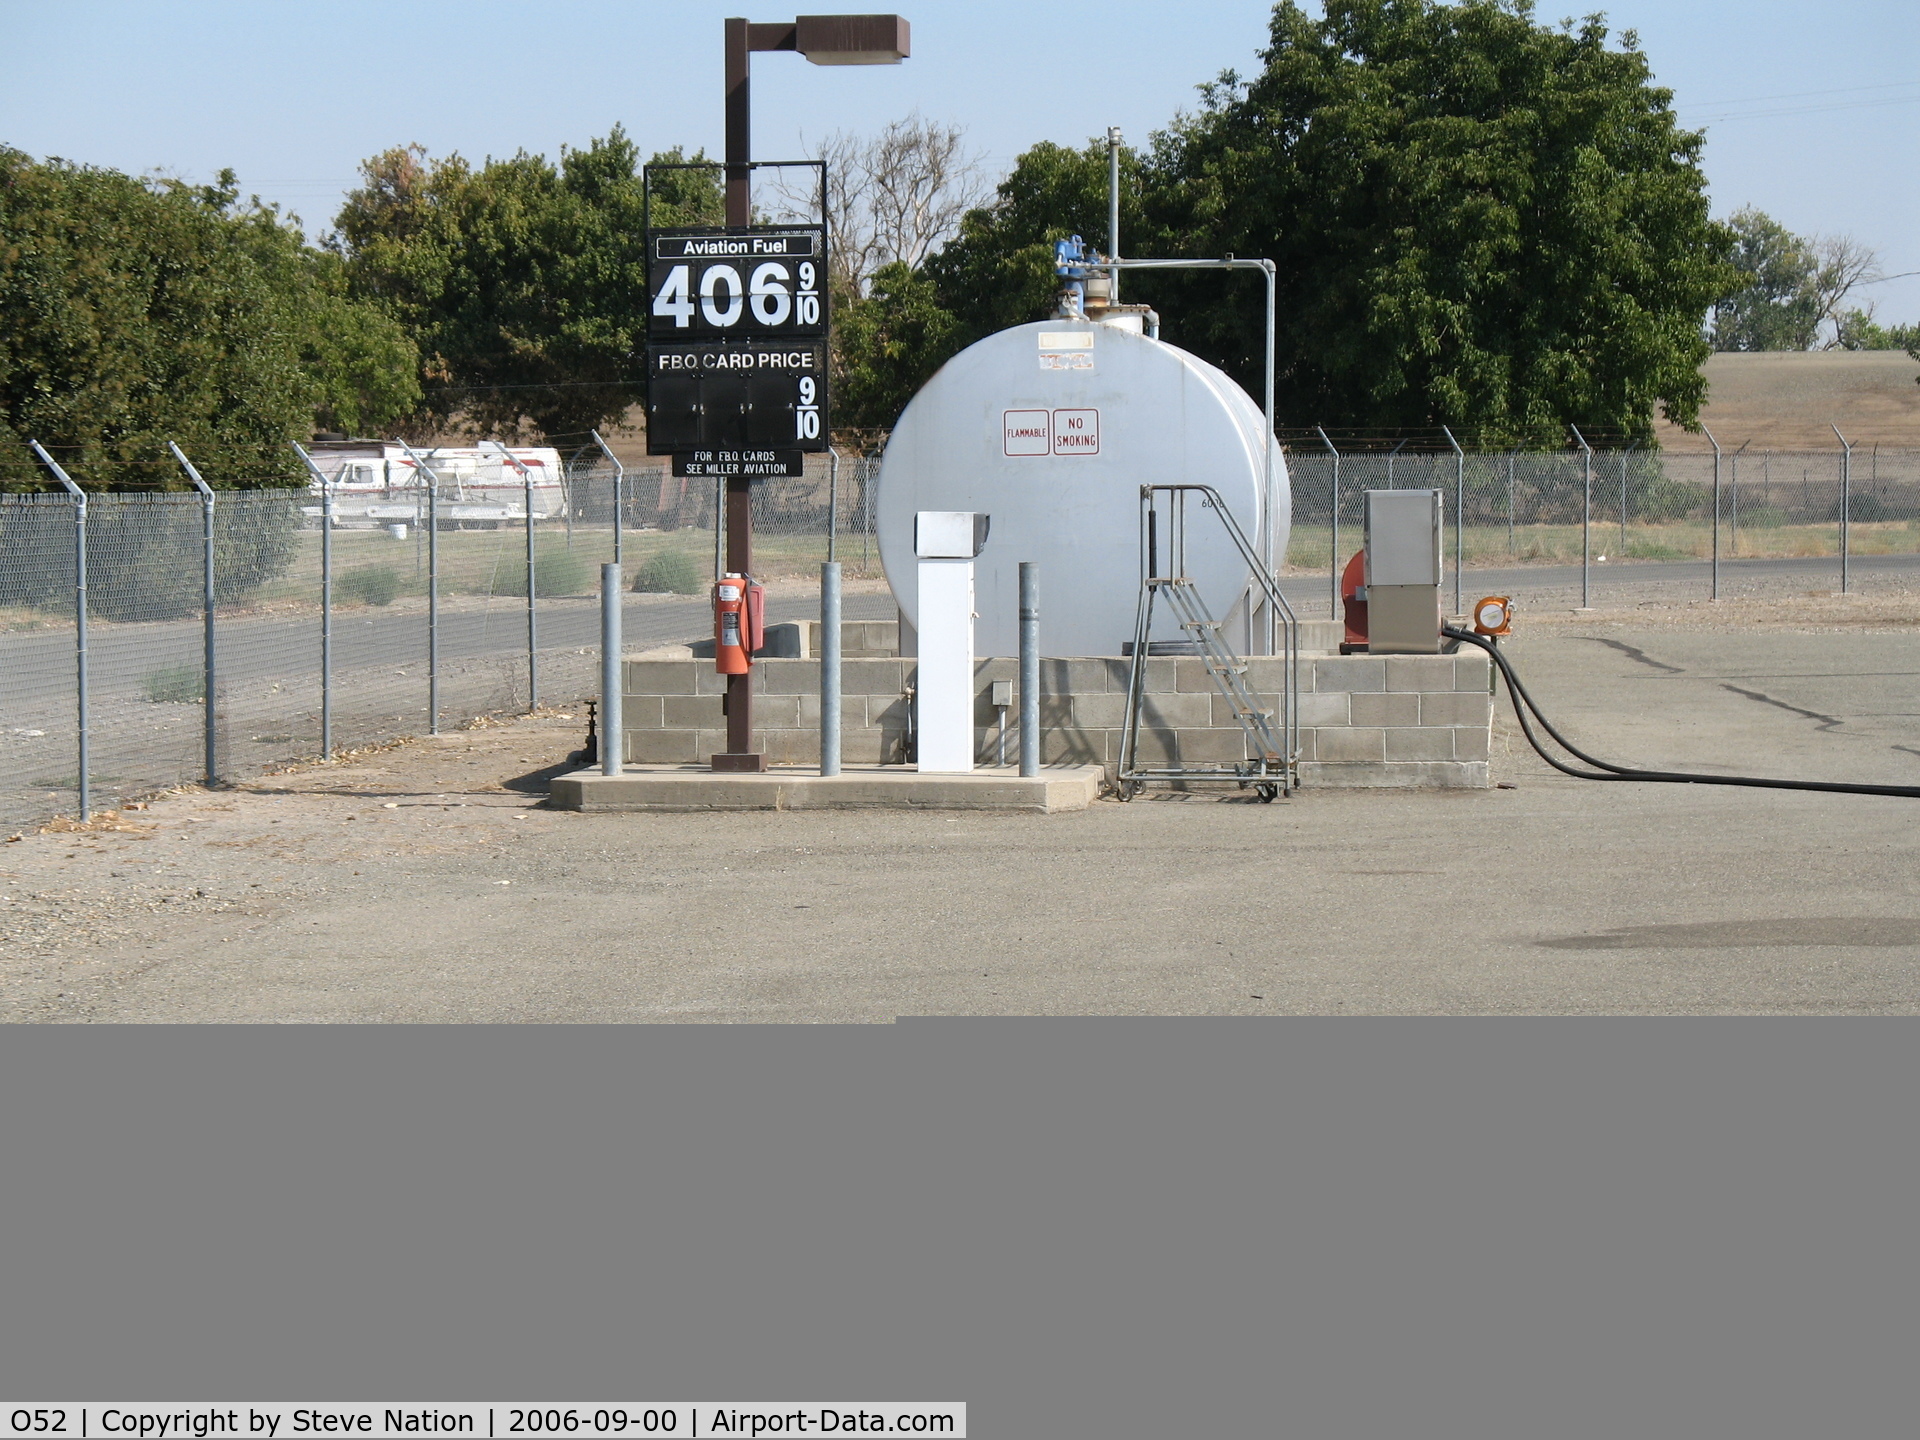 Sutter County Airport (O52) - Gas pumps at Sutter County Airport, Yuba City, CA